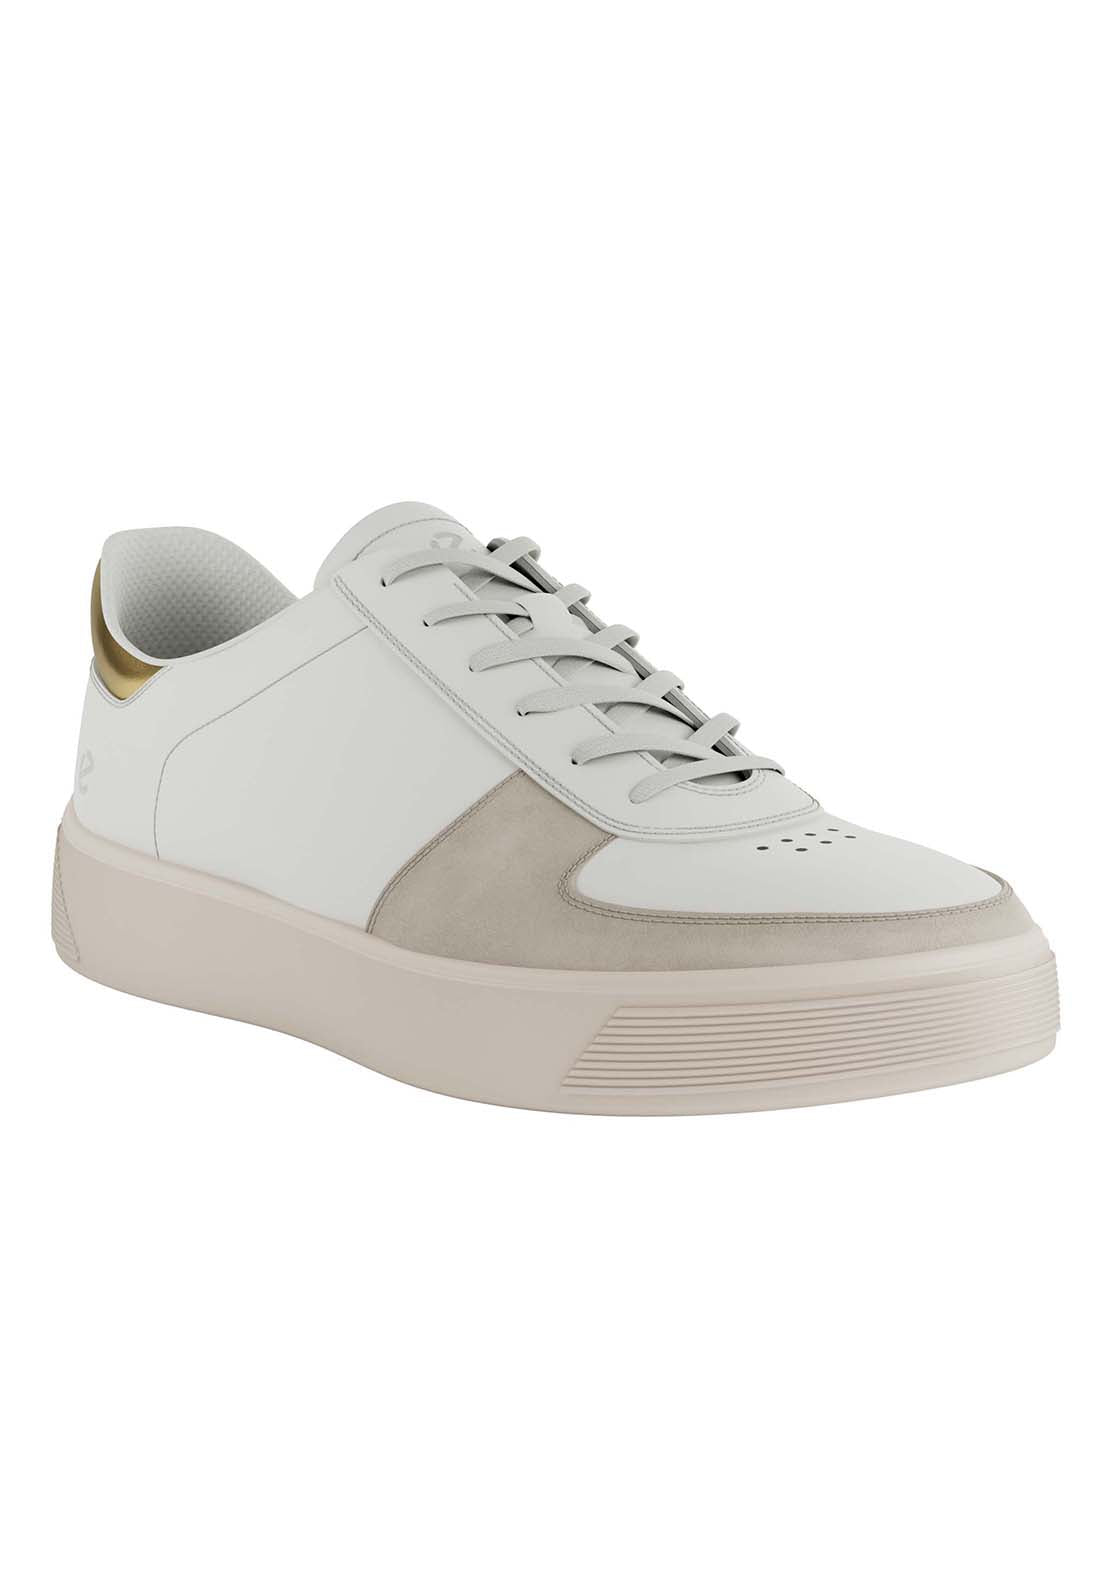 Ecco Street Tray Casual Shoe 1 Shaws Department Stores